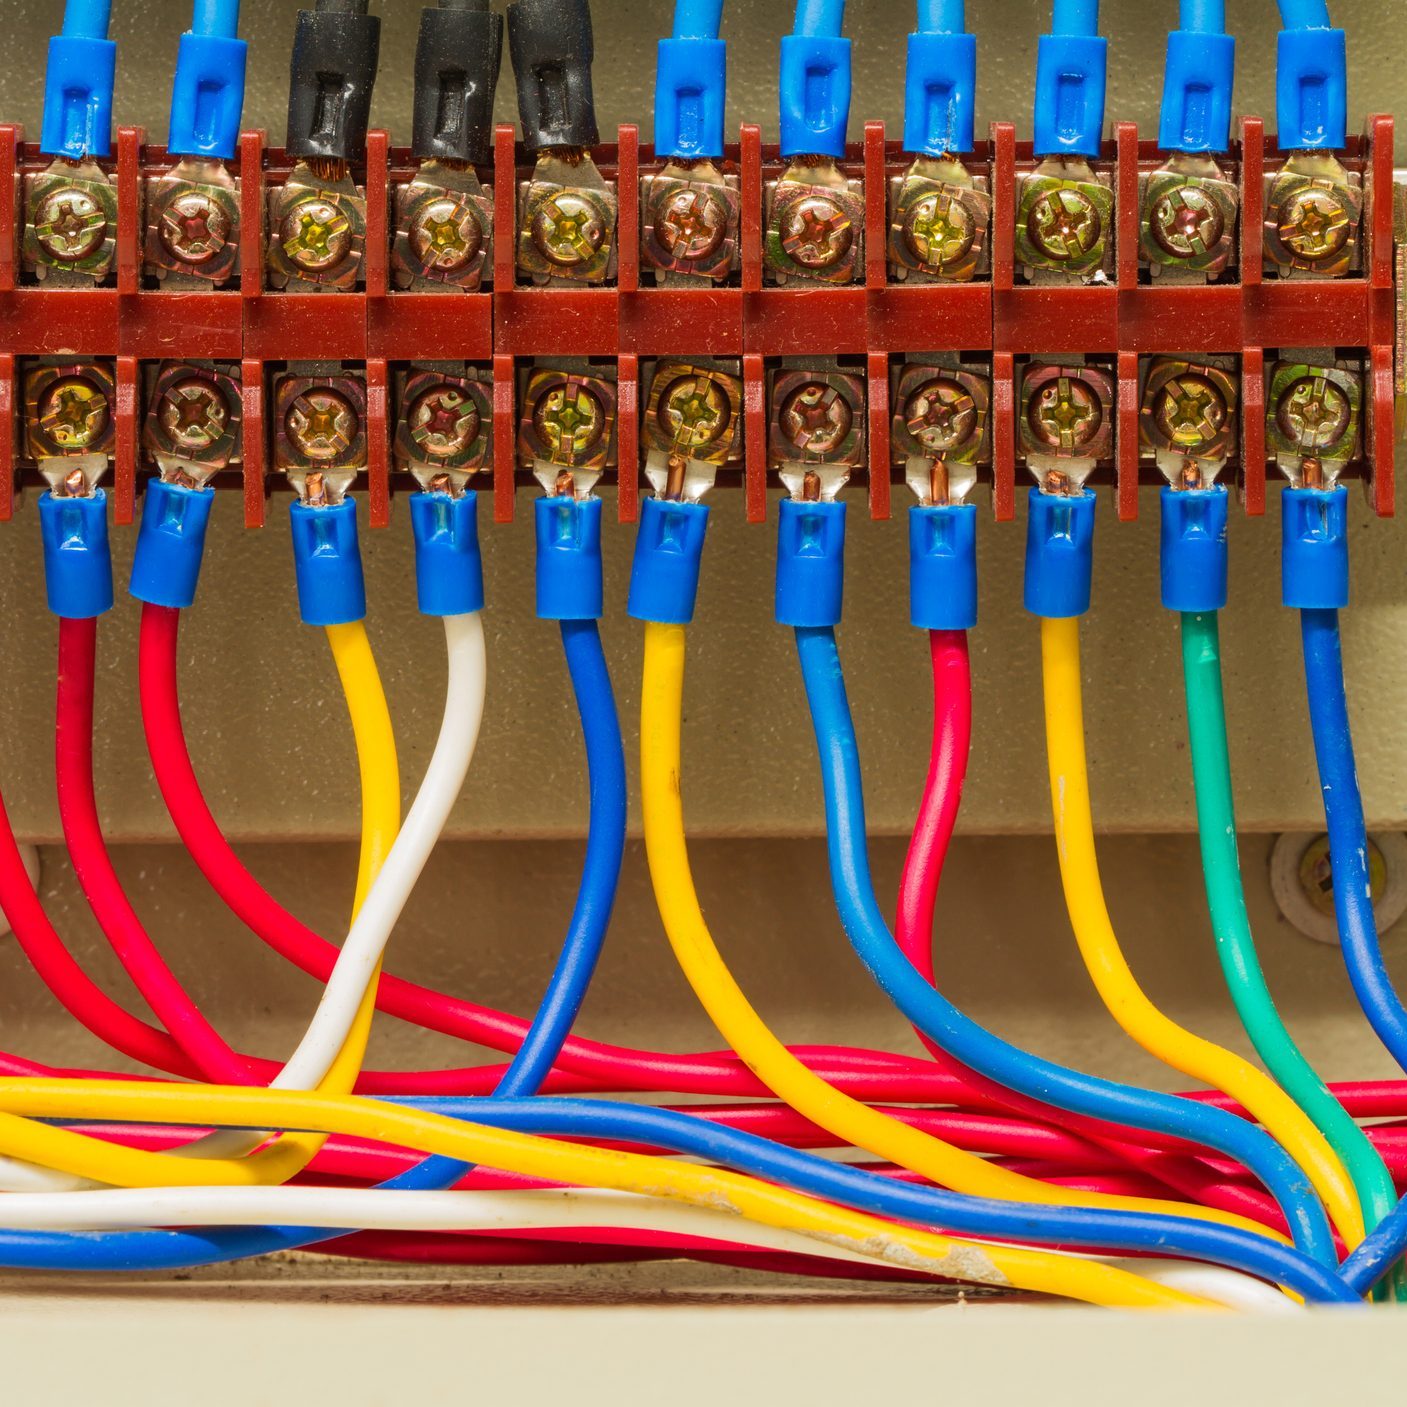 Electrical Wiring Colours - A Complete Guide